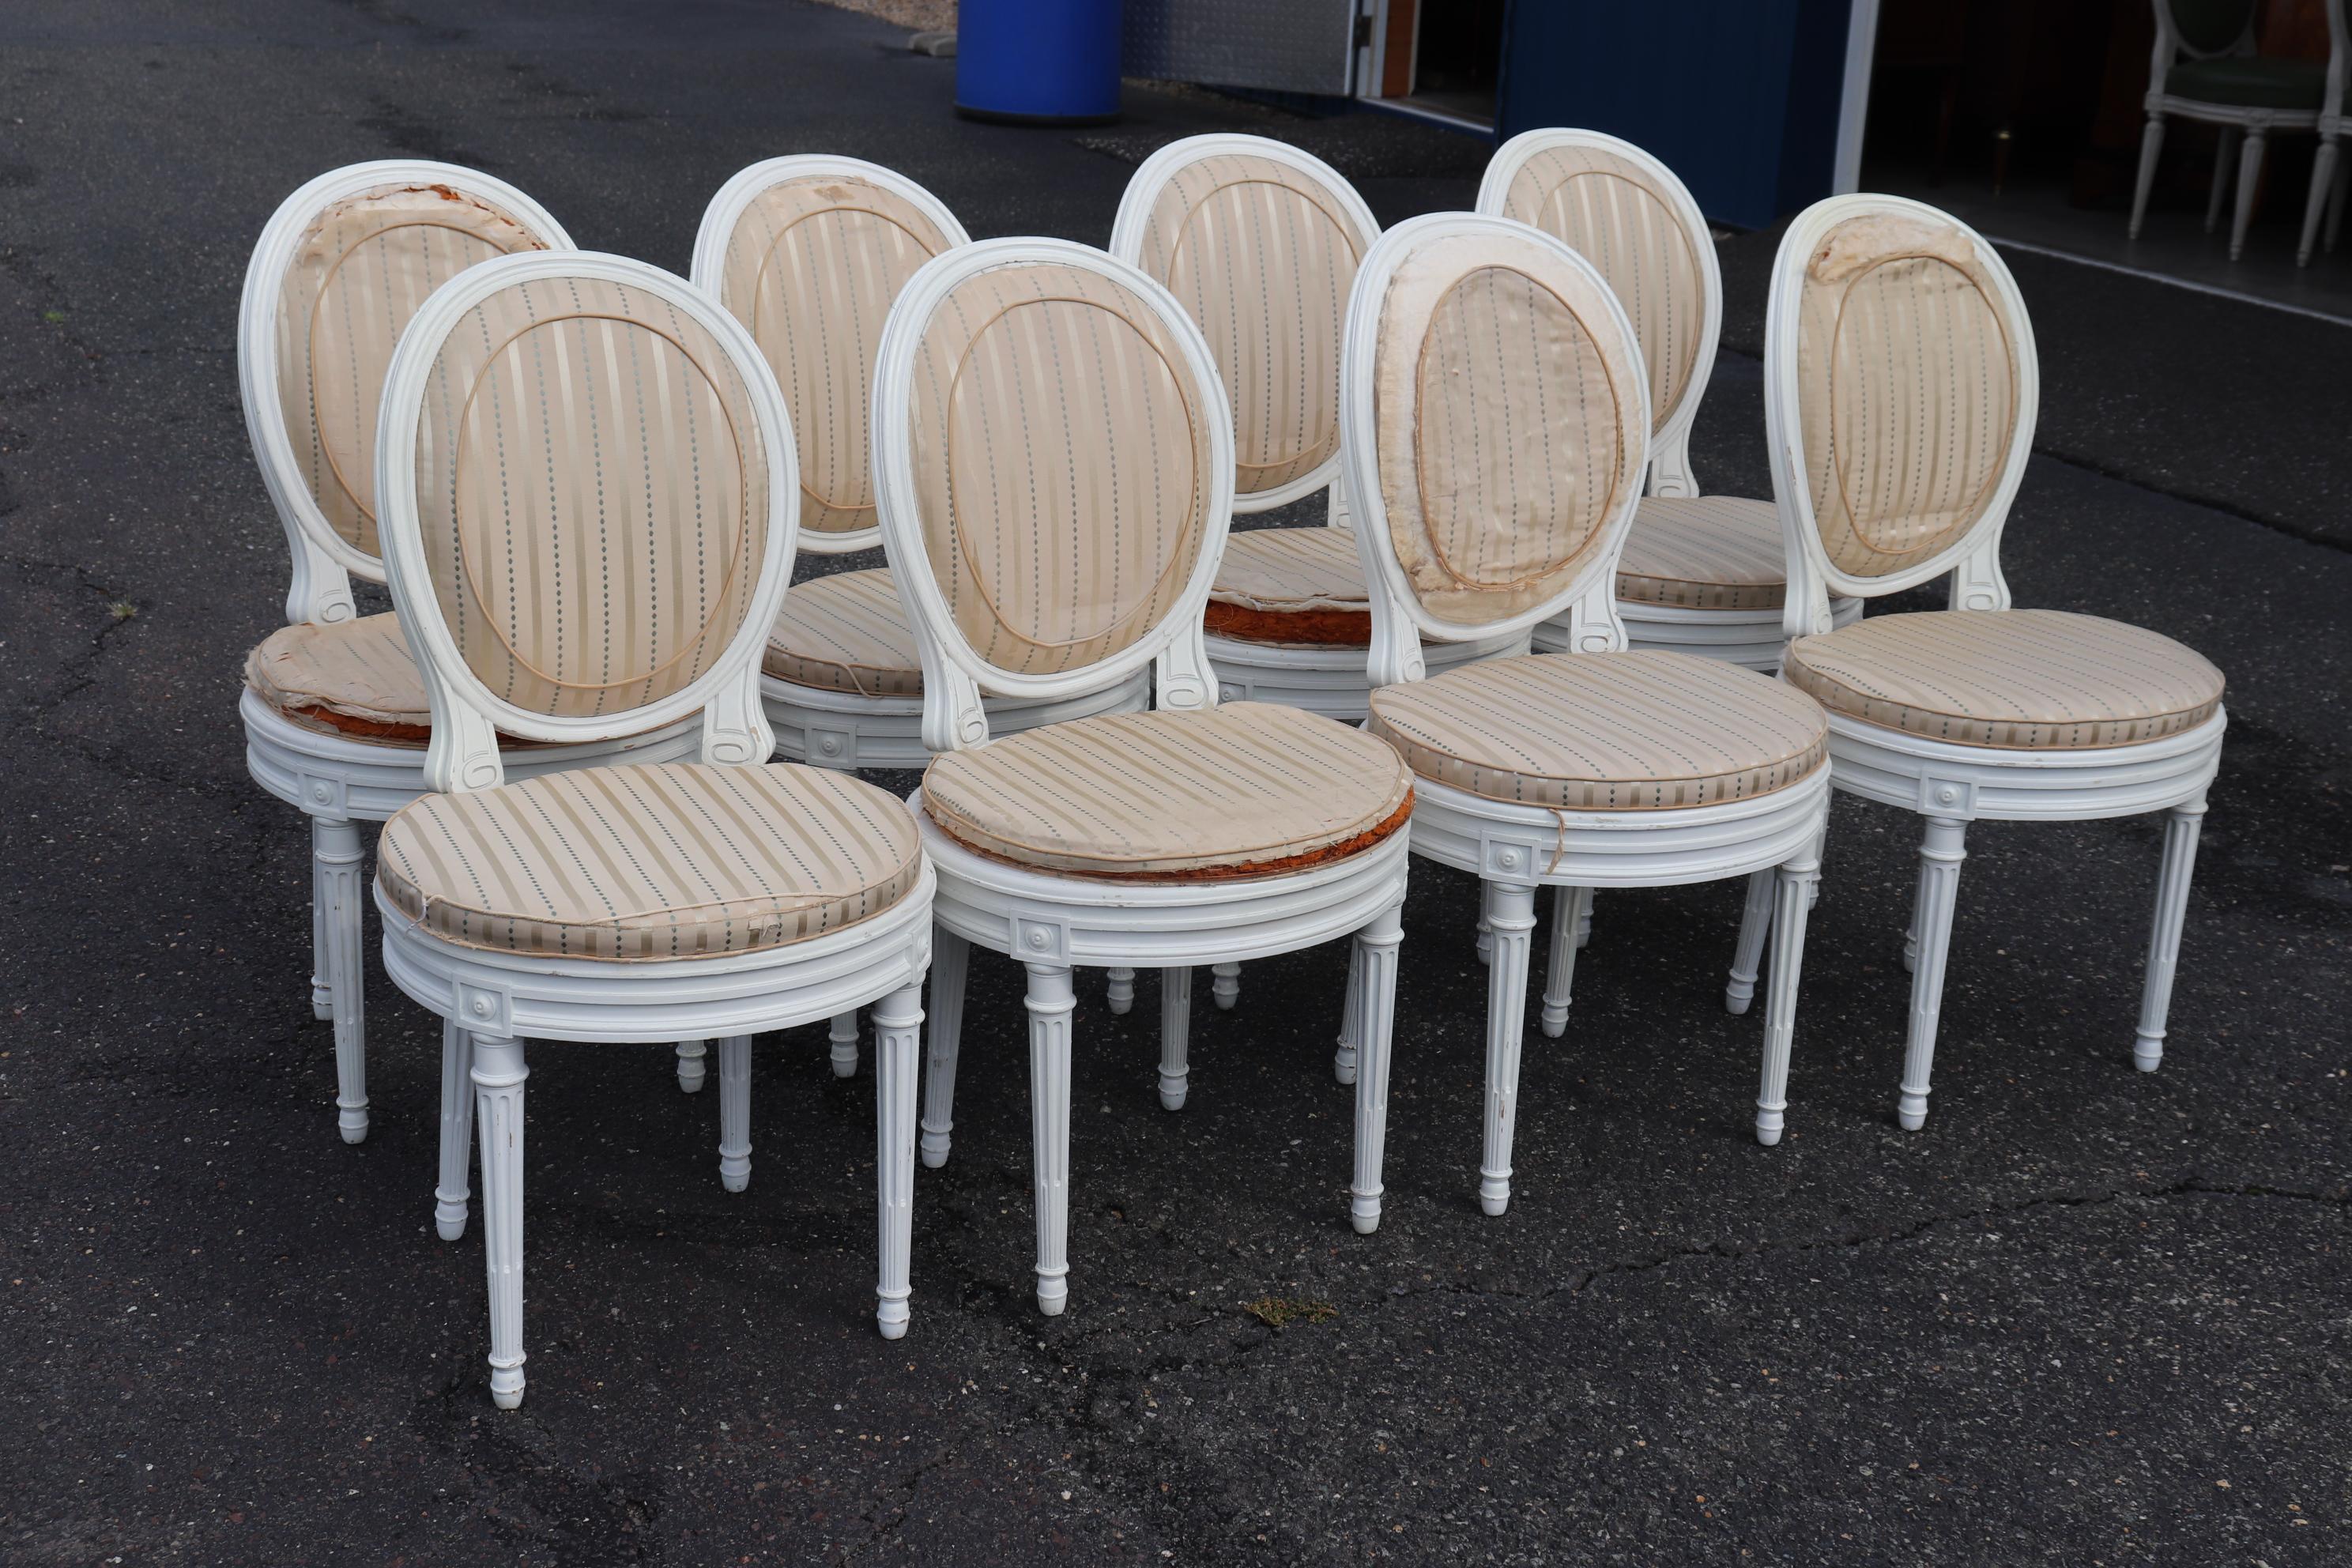 These chairs are painted in bright white and have caned backs and seats and the condition of teh cane is very good except for one small hole on the seat of one chair as shown. The cushions are removable and can be reupholstered as they are easy to